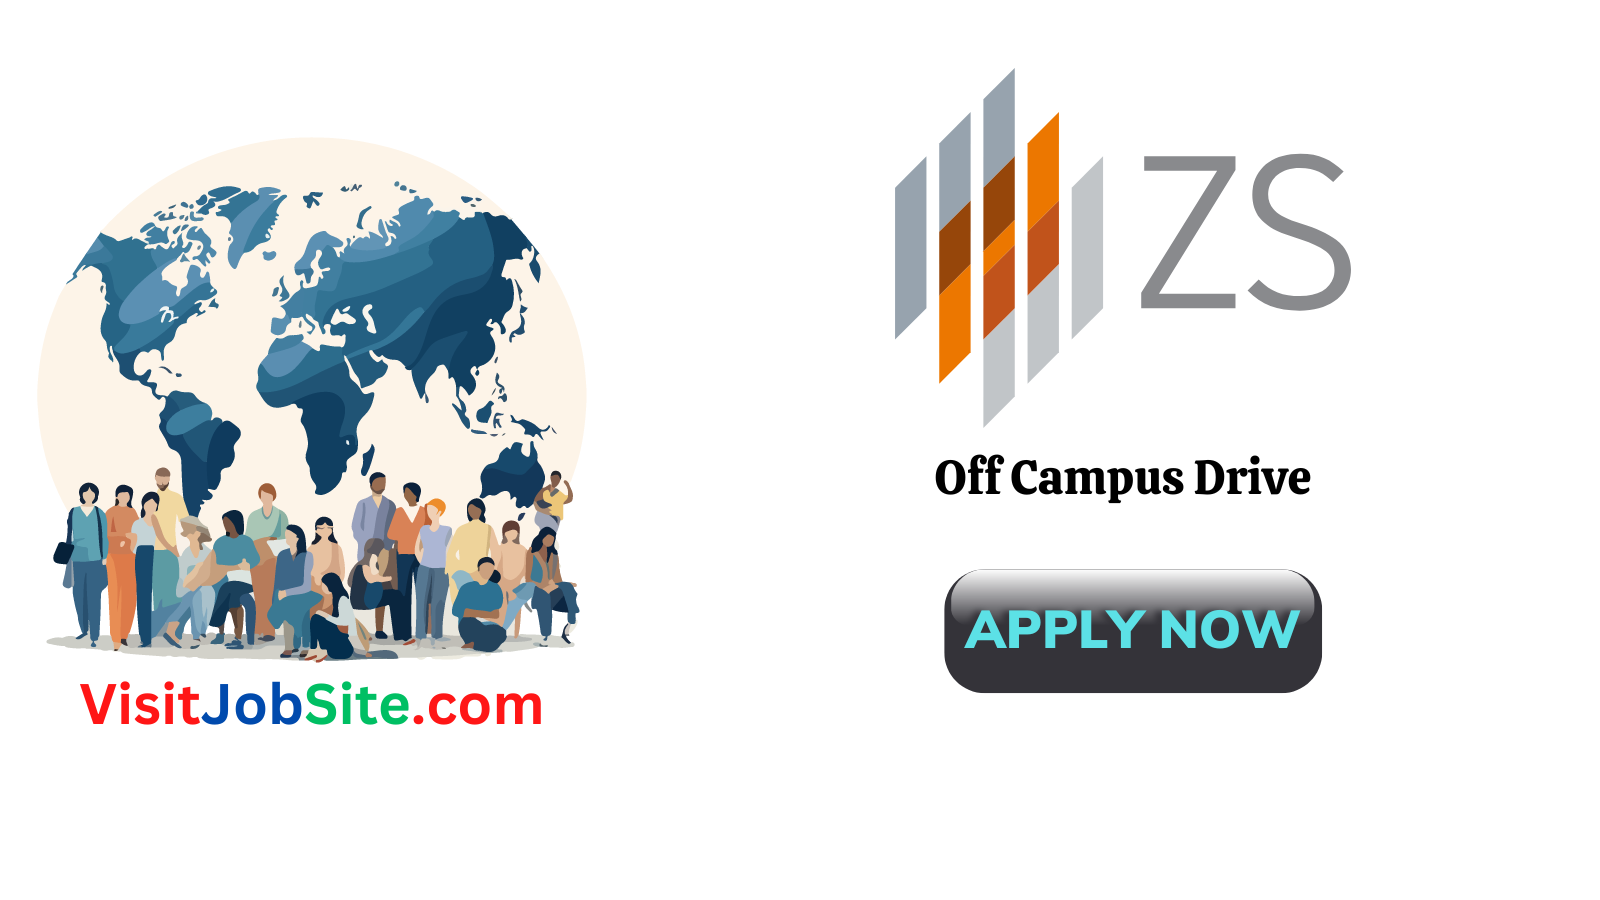 zs Off Campus Drive